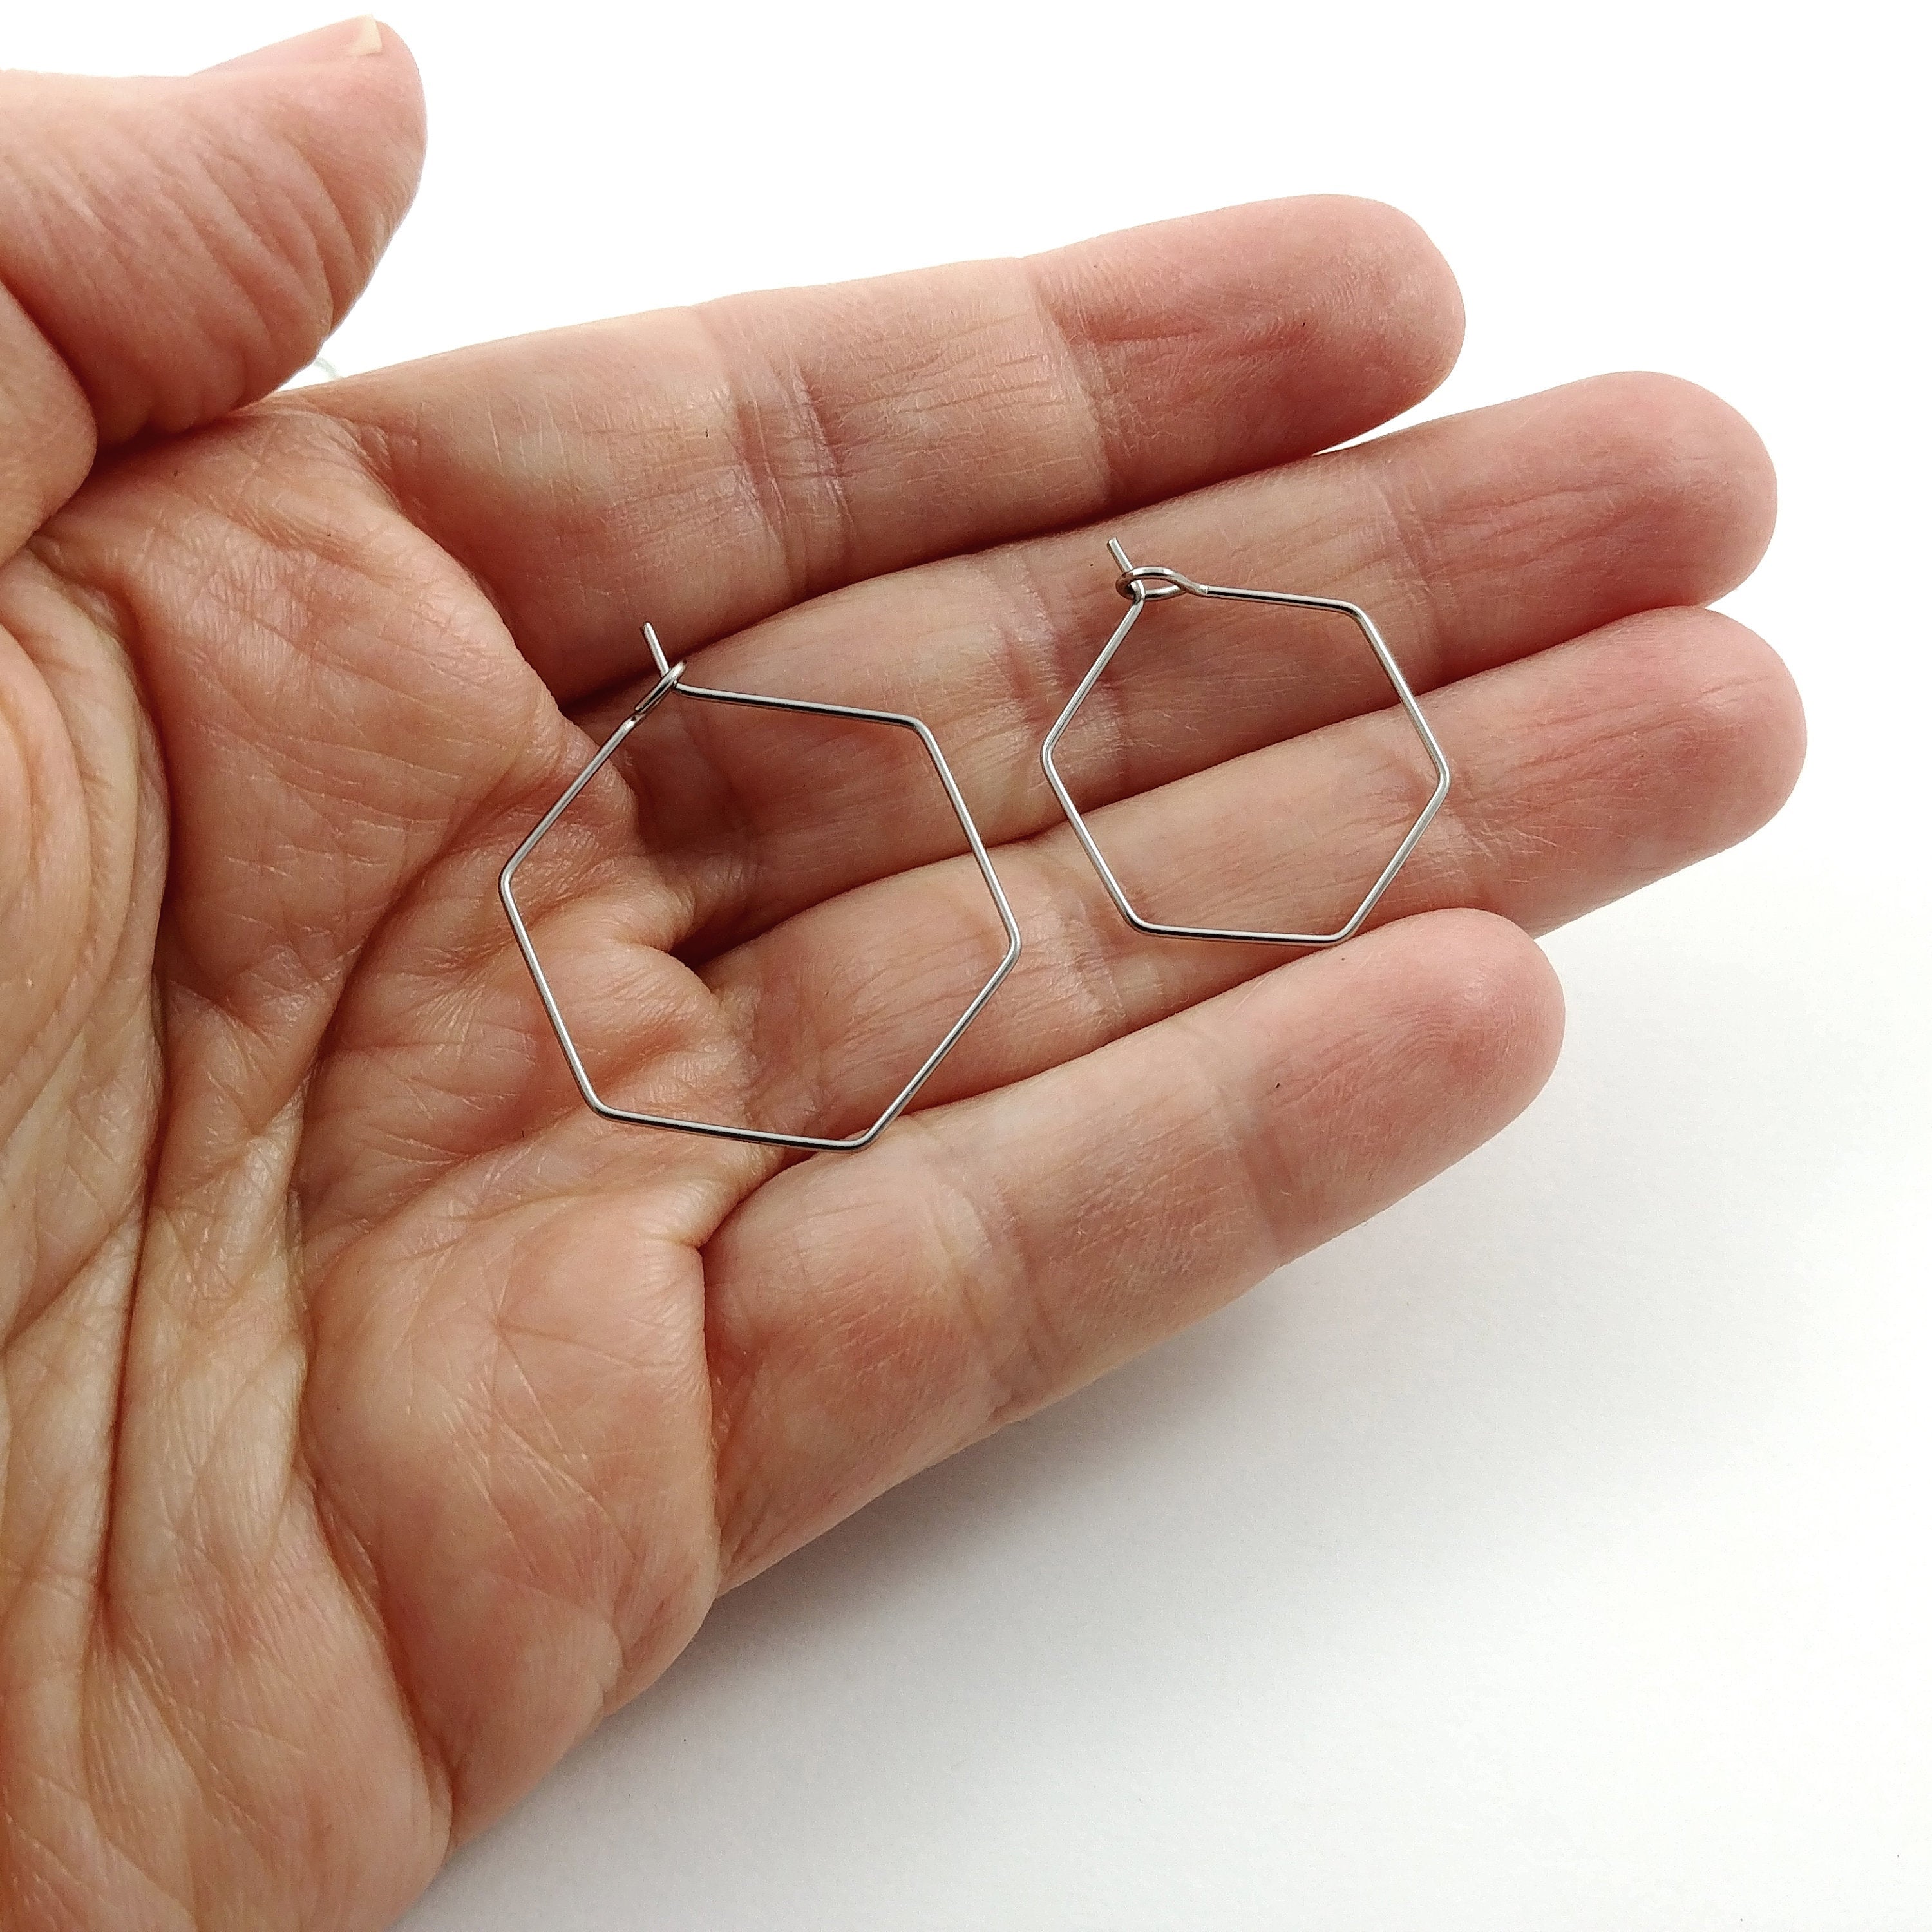 Stainless steel hexagon hoops 10pcs (5 pairs) - 2 size available